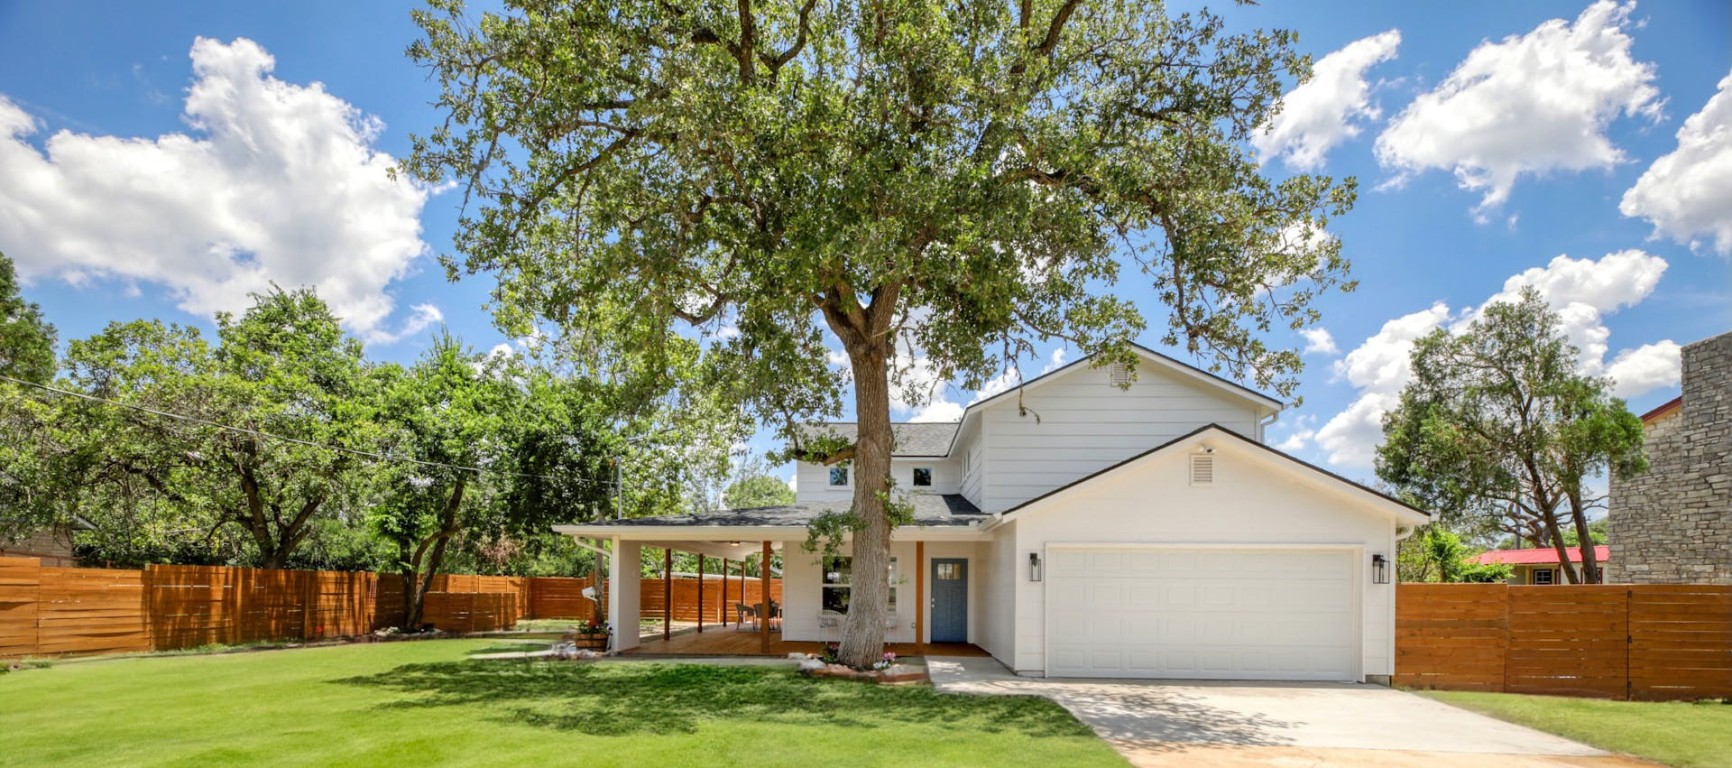 Front of Home with Oak Tree for shade and large front yard